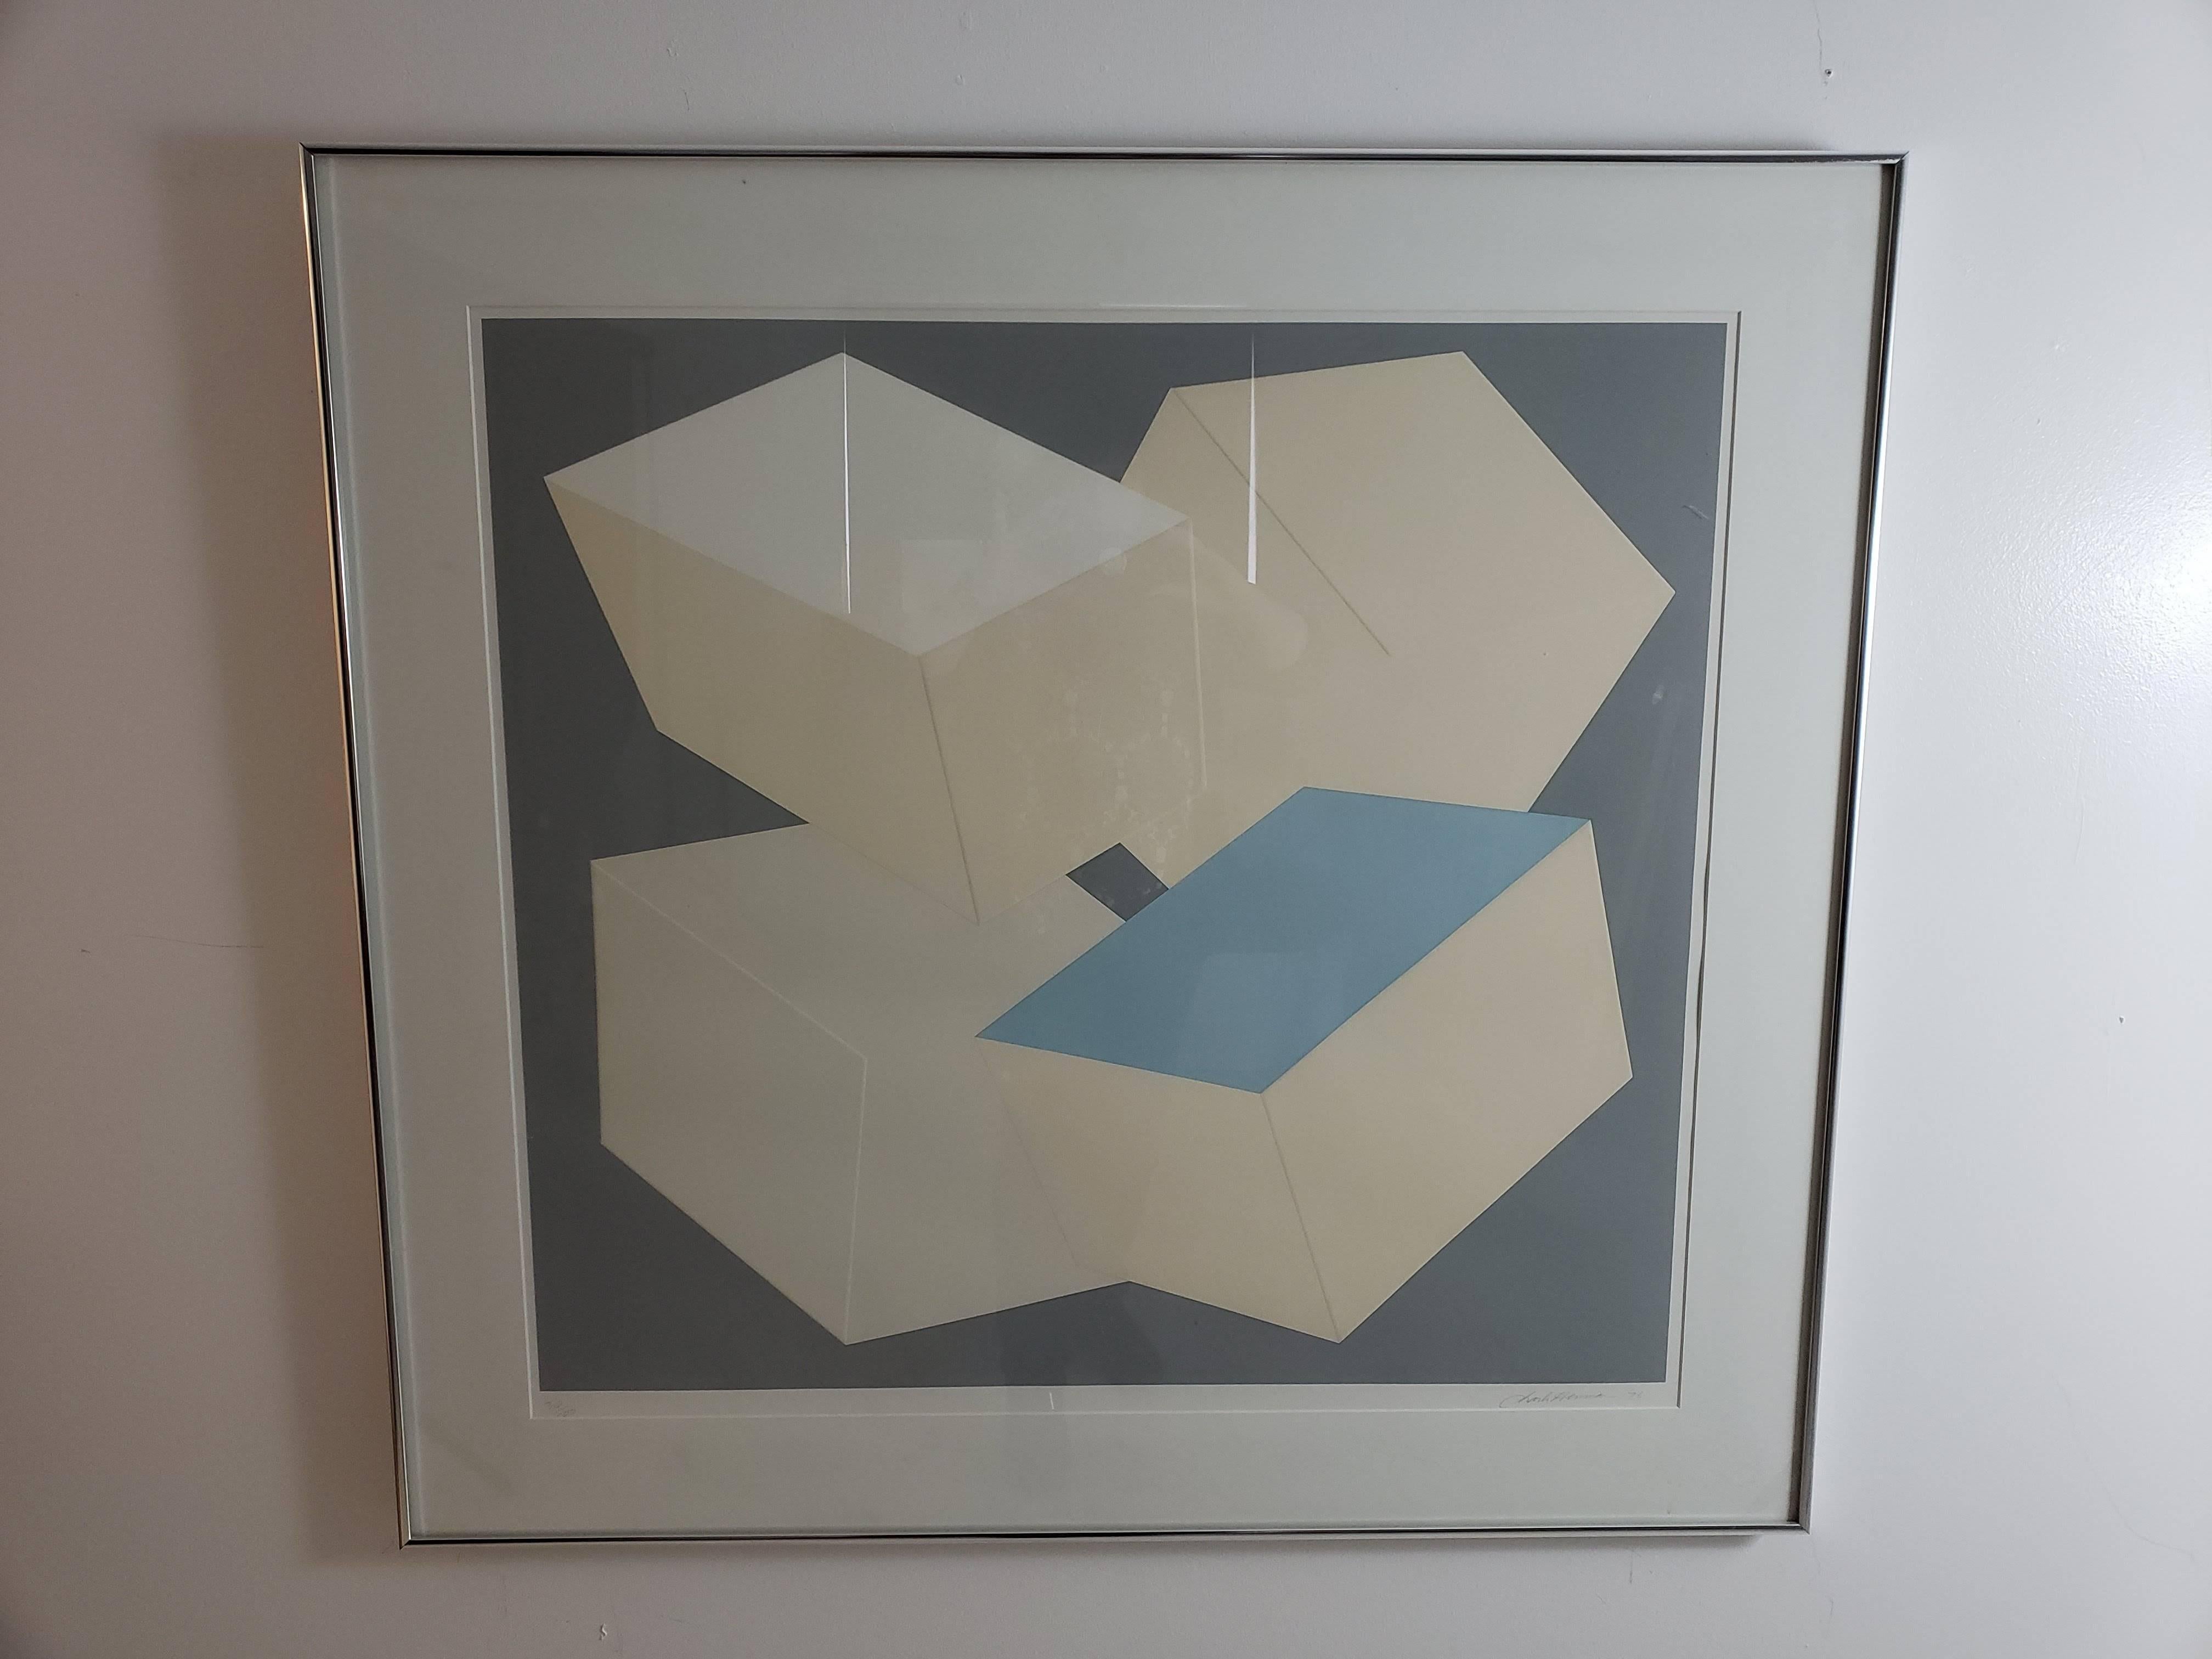 North American Mid-Century Modern Charles Hinman 1976 Pace Editions Lithograph